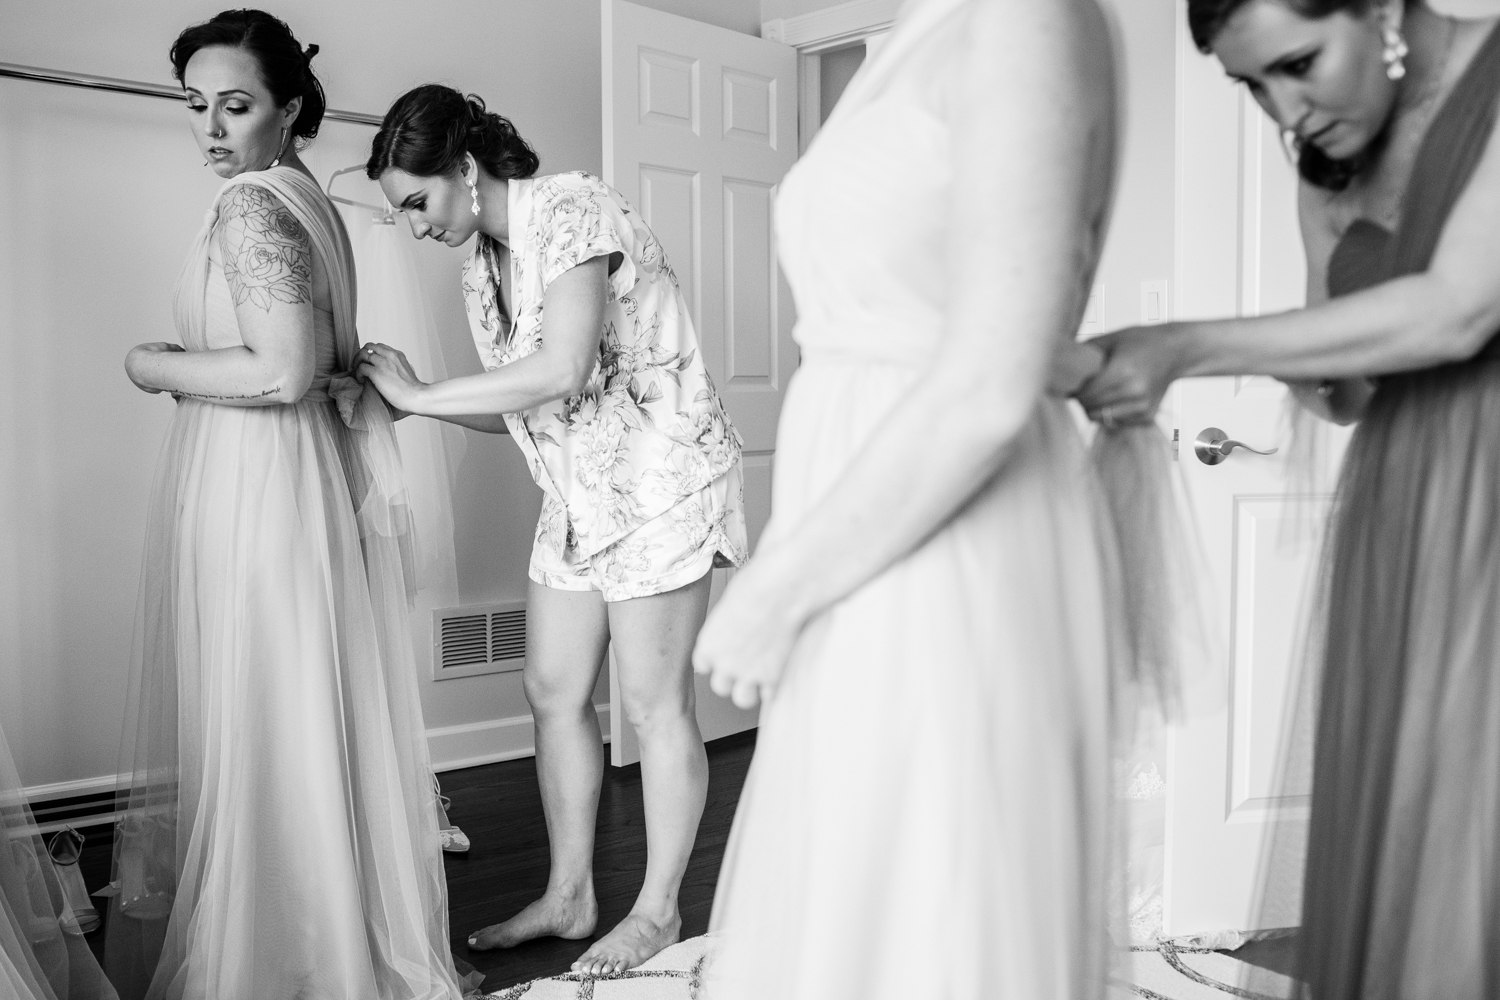 Bridesmaids help each other get ready at home